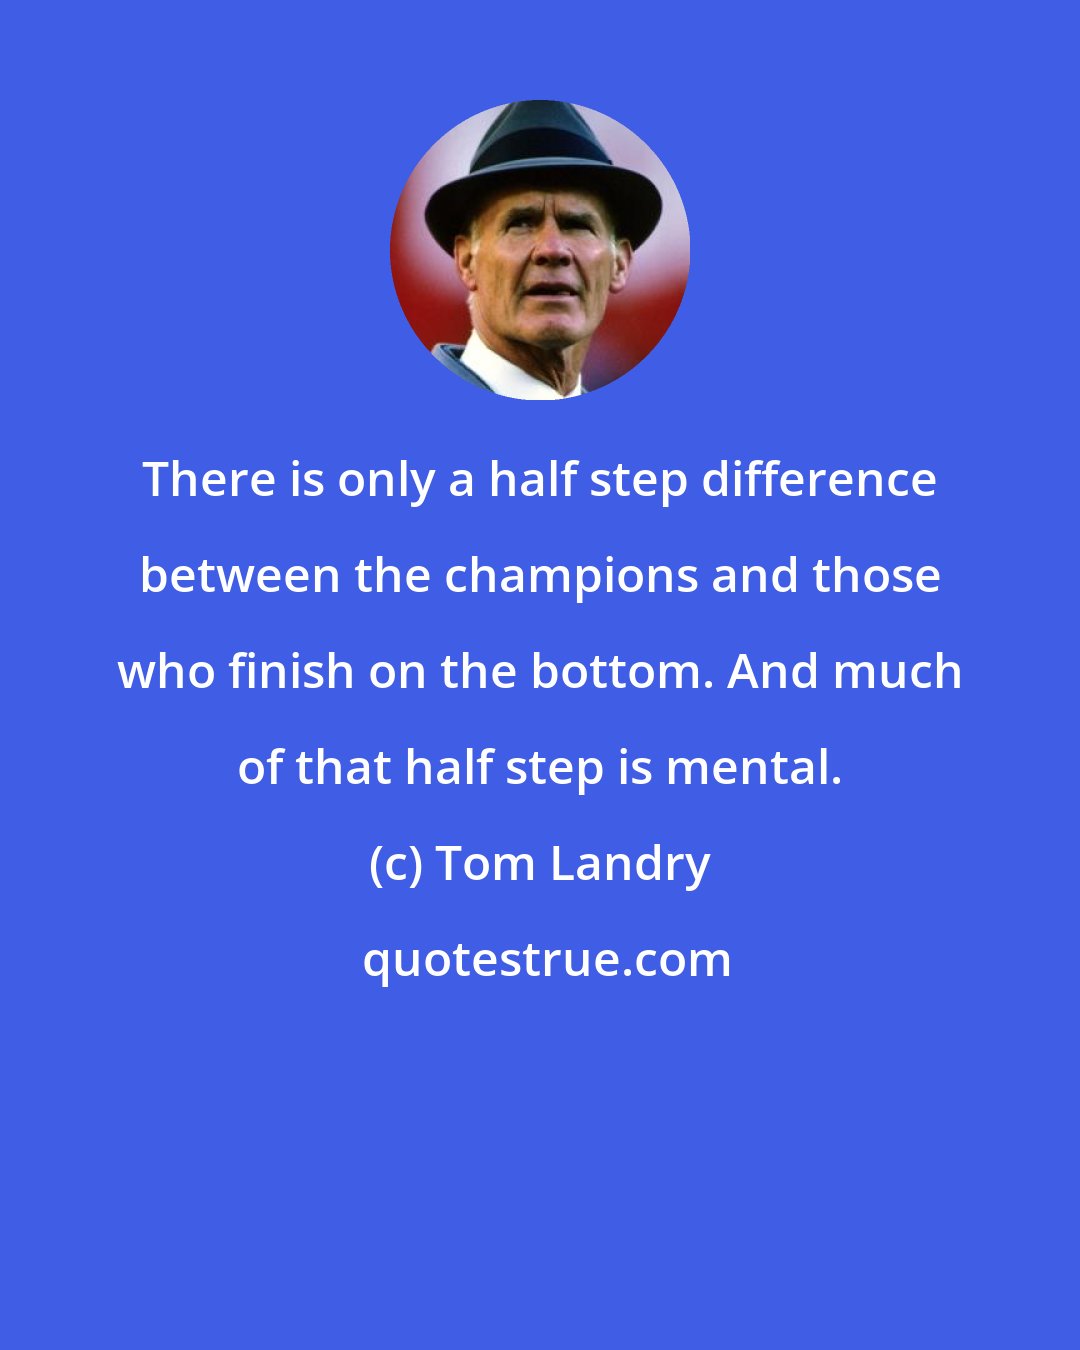 Tom Landry: There is only a half step difference between the champions and those who finish on the bottom. And much of that half step is mental.